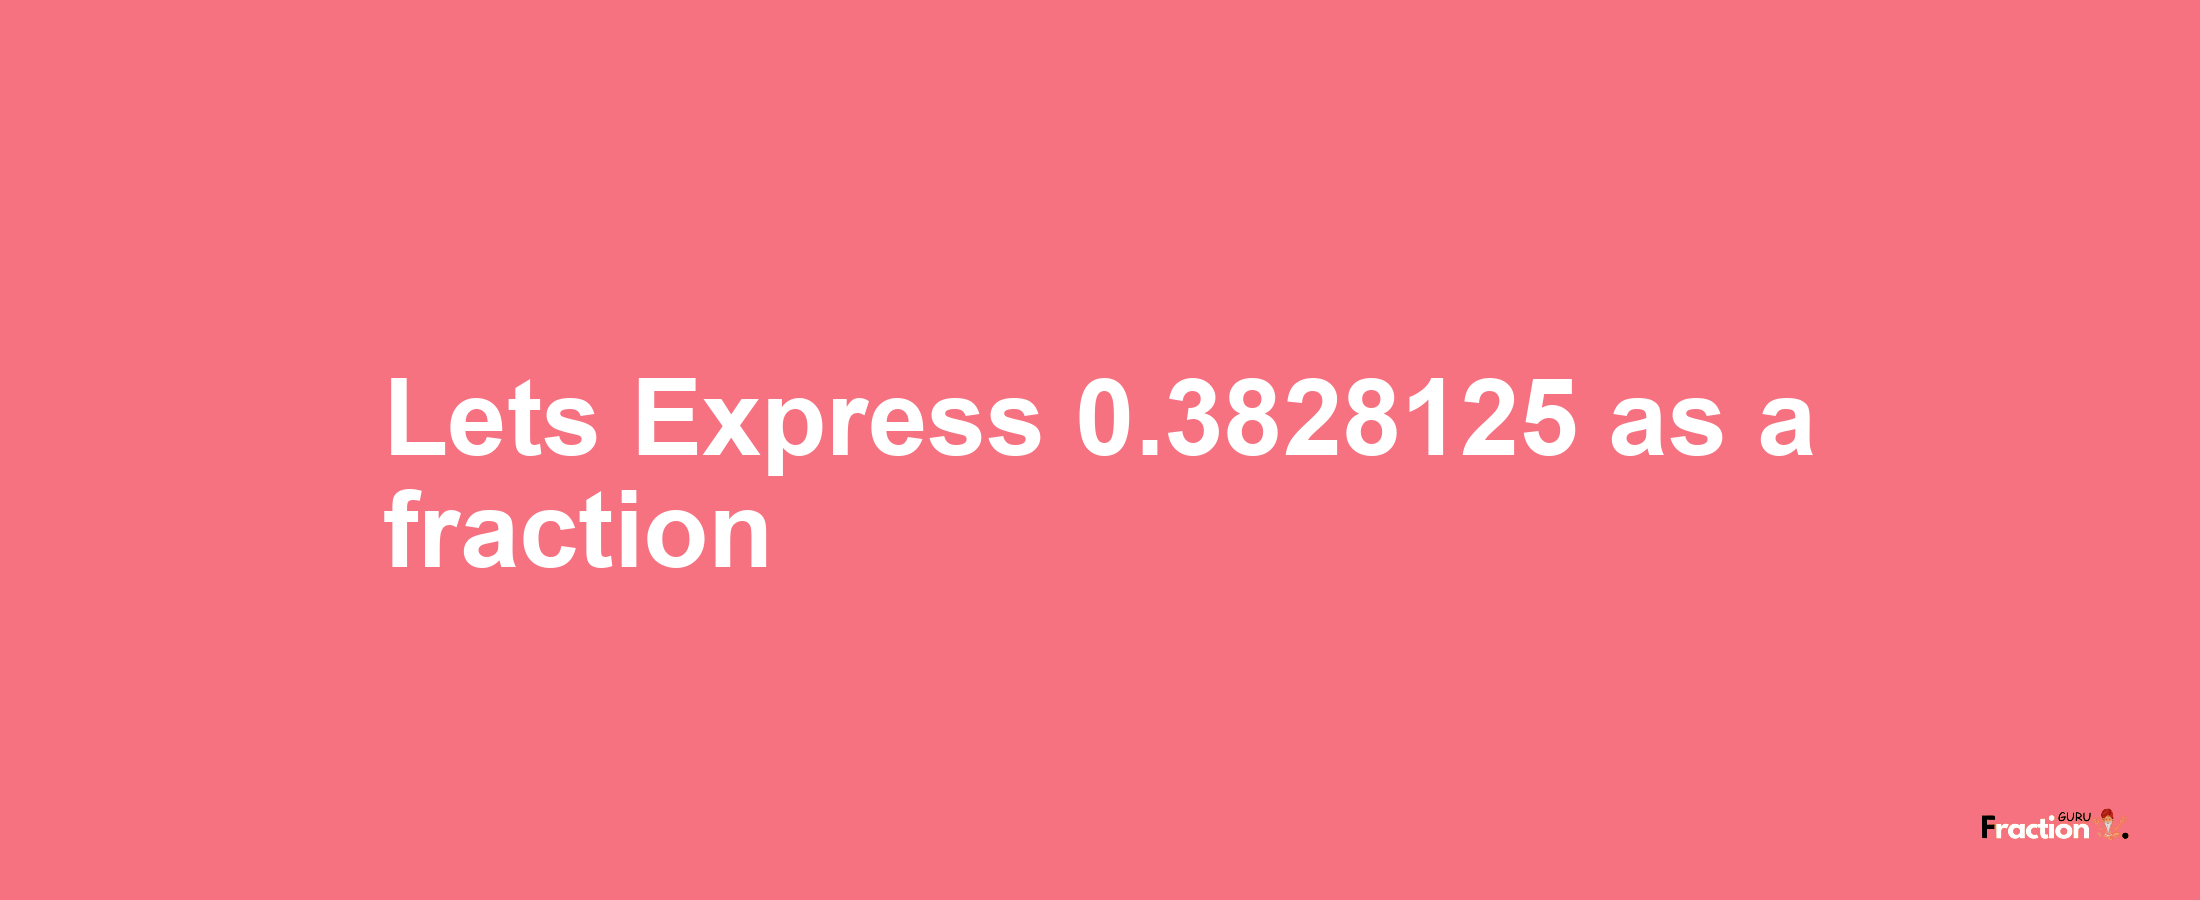 Lets Express 0.3828125 as afraction